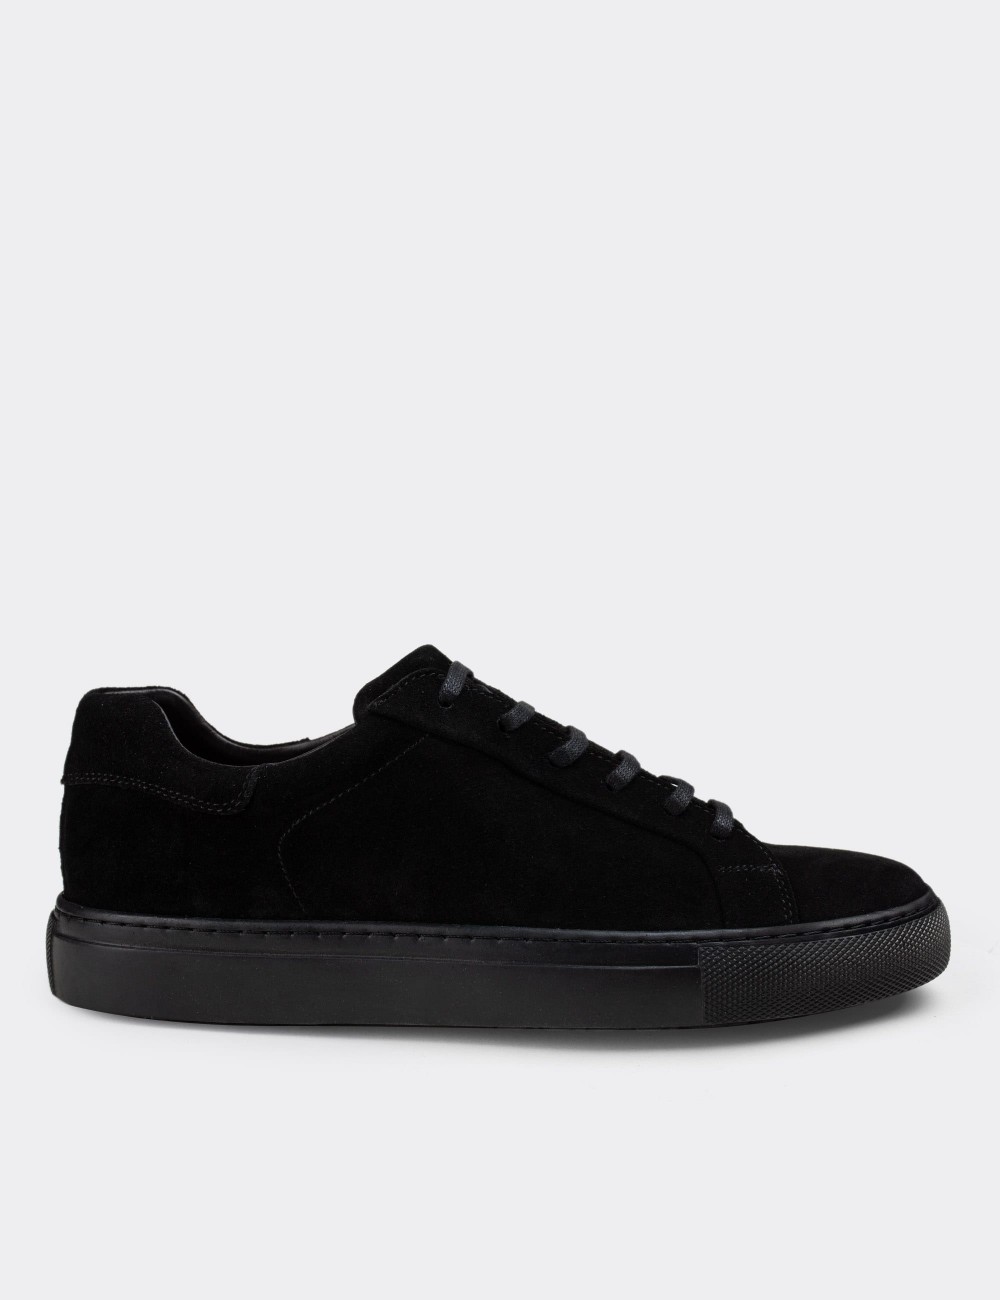 Black Suede Leather Sneakers - 01829MSYHC01